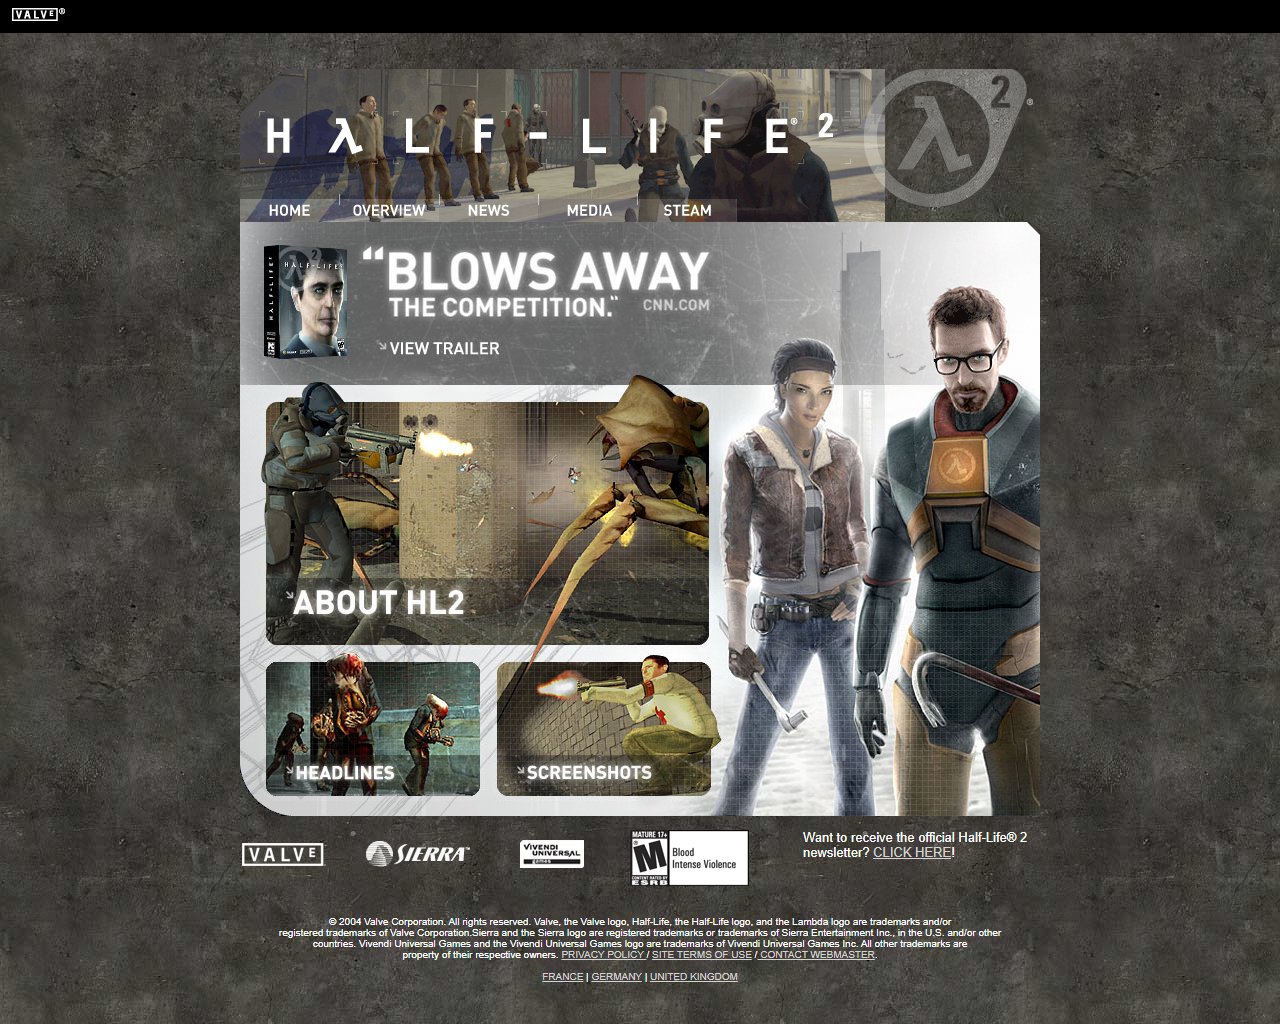 Valve's Half-Life 2 website home page, circa 2004. A grey concrete background with a layout of images from the game linking to various sections of the site, as well as a quote by CNN praising the game and some concept art.